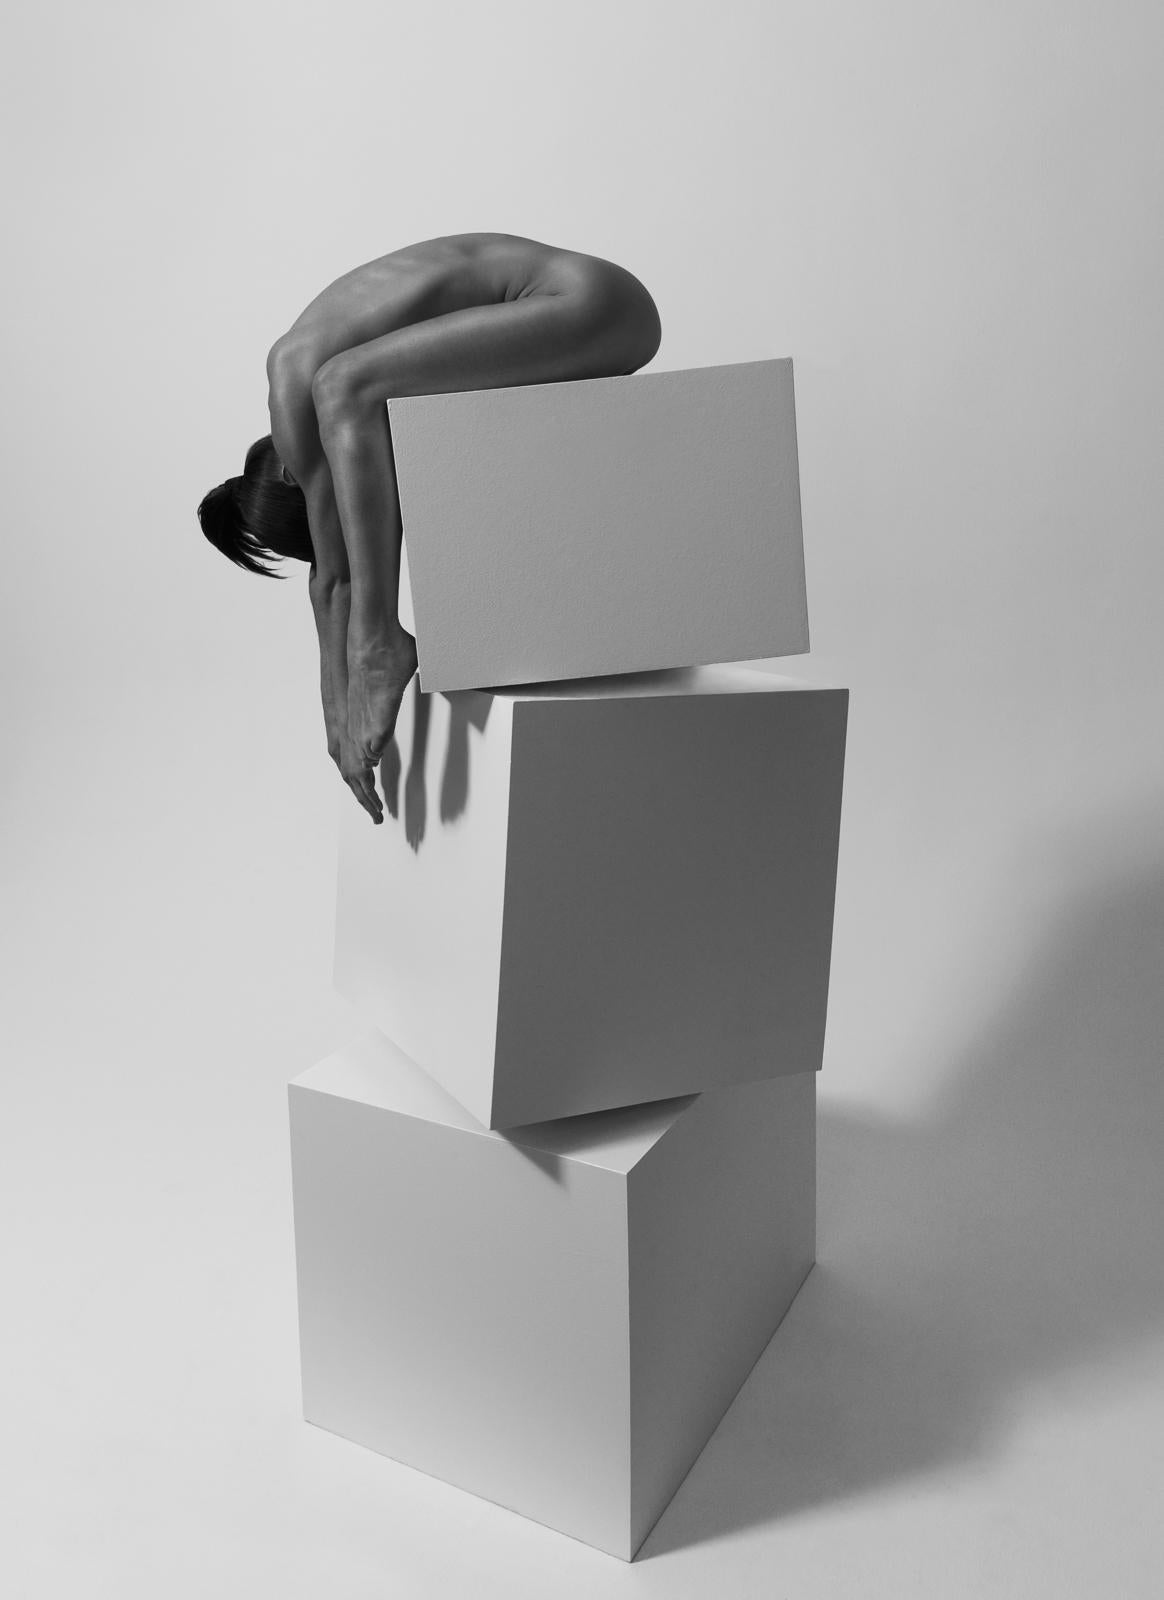 154.08.11 is a limited-edition photograph by contemporary artist Klaus Kampert. It belongs to the series "Dancing the Cubes". In order to resemble typographic characters, Klaus Kampert poses his models in this series in almost geometric and